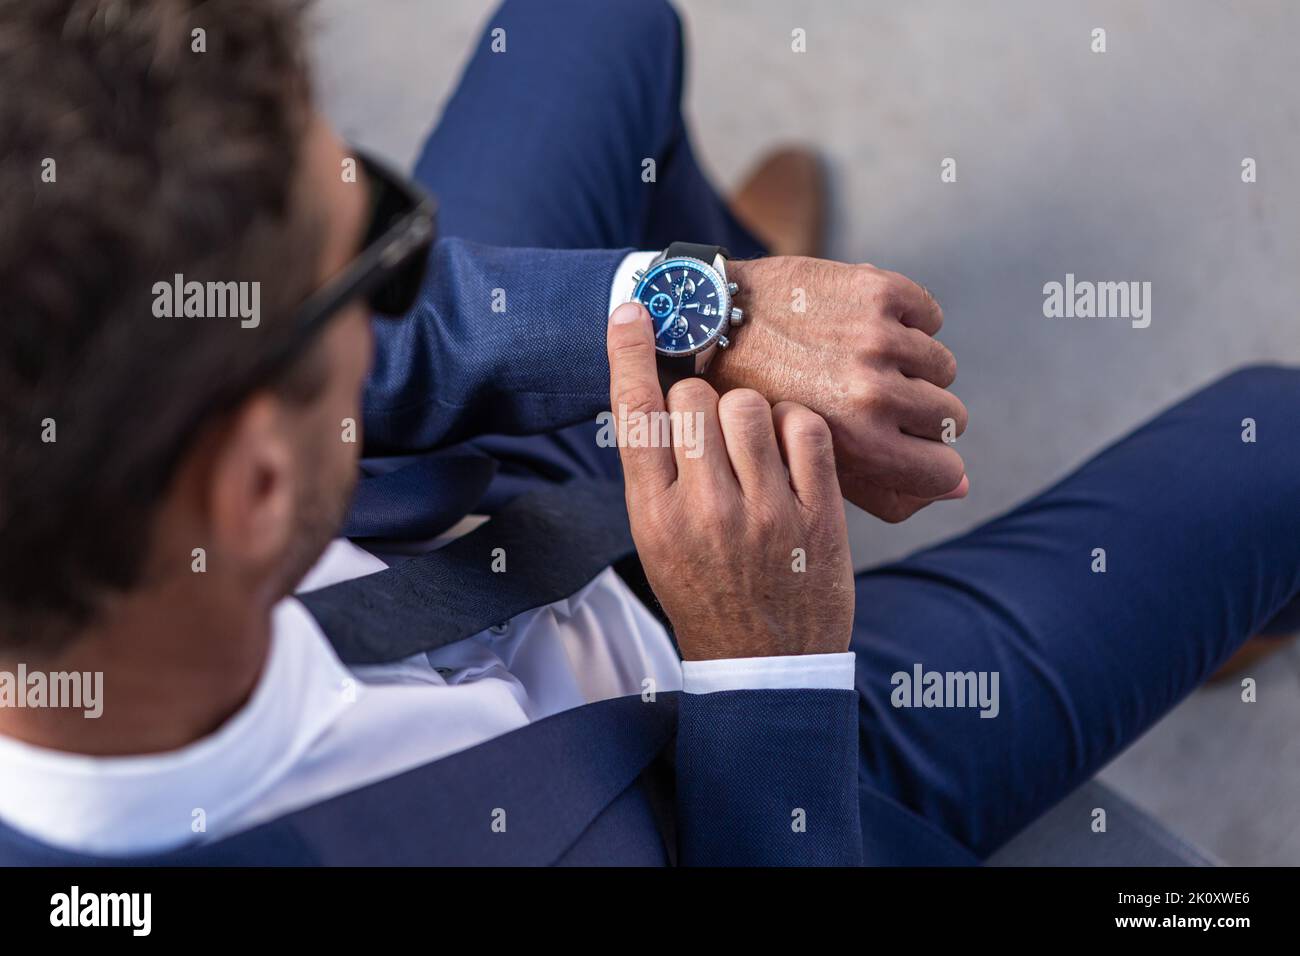 Top view of anonymous businessman in suit checking time on expensive wristwatch while waiting for meeting on city street Stock Photo